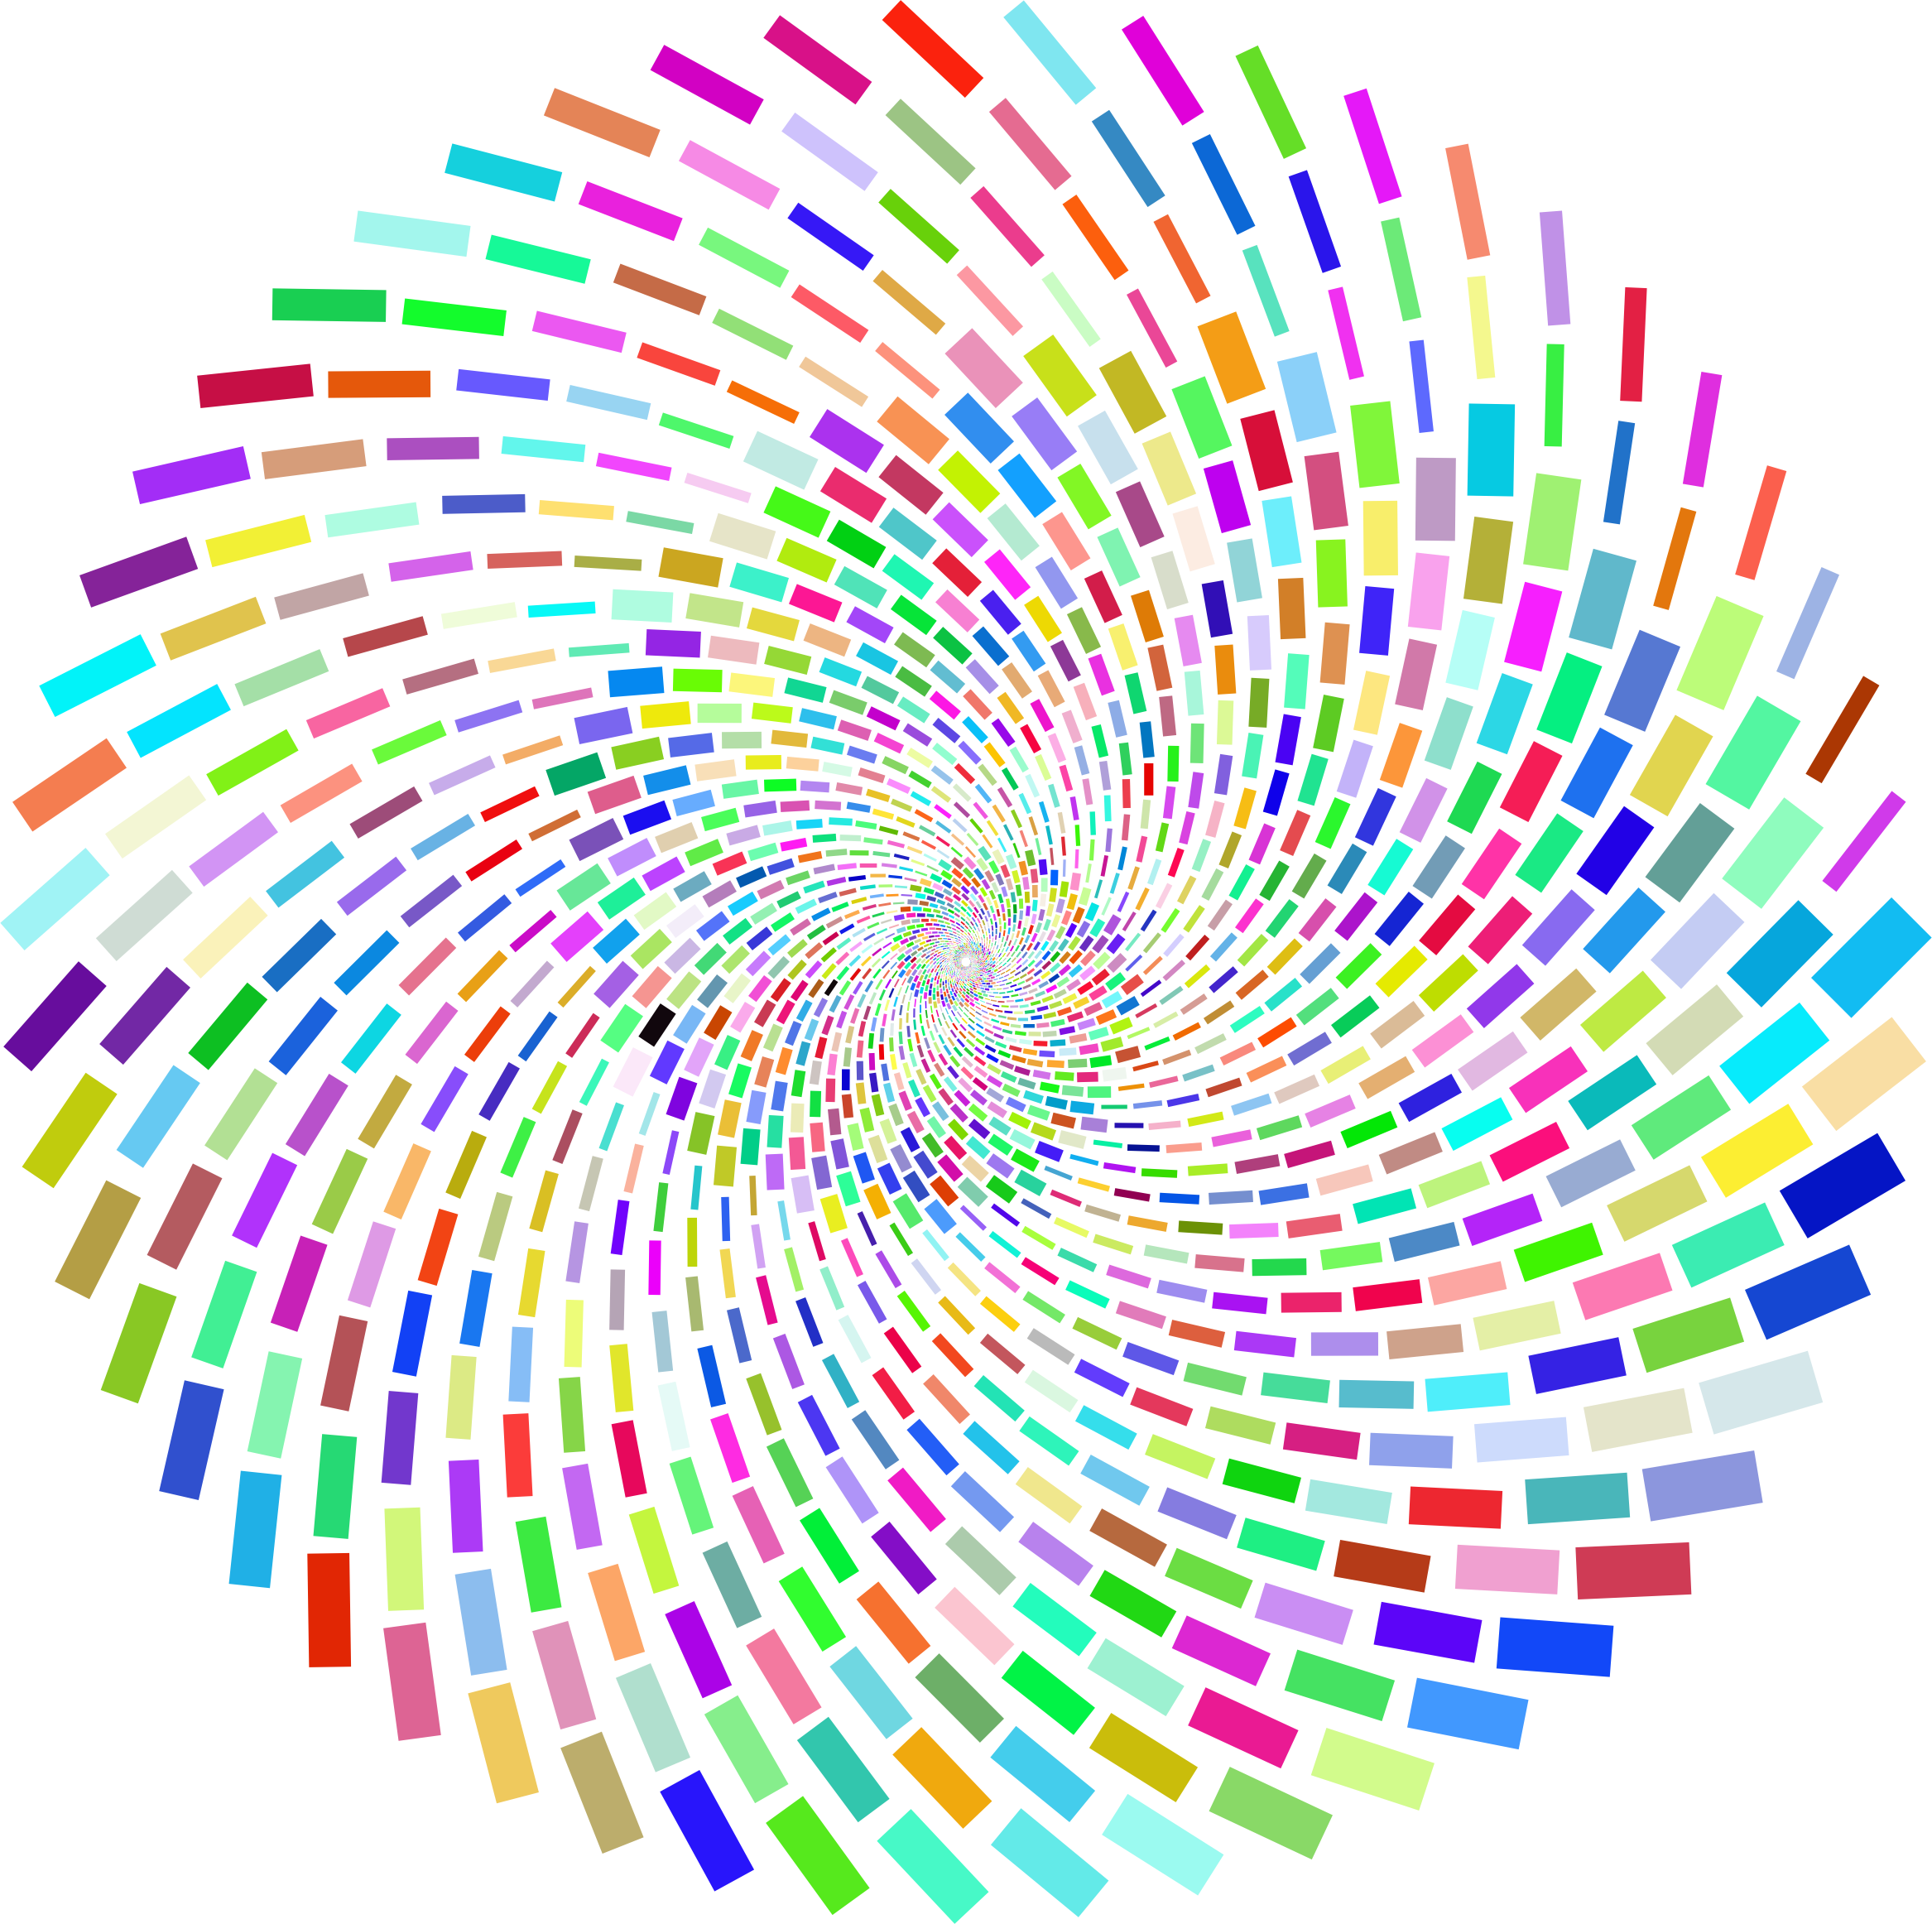 A Colorful Spiral Of Rectangles